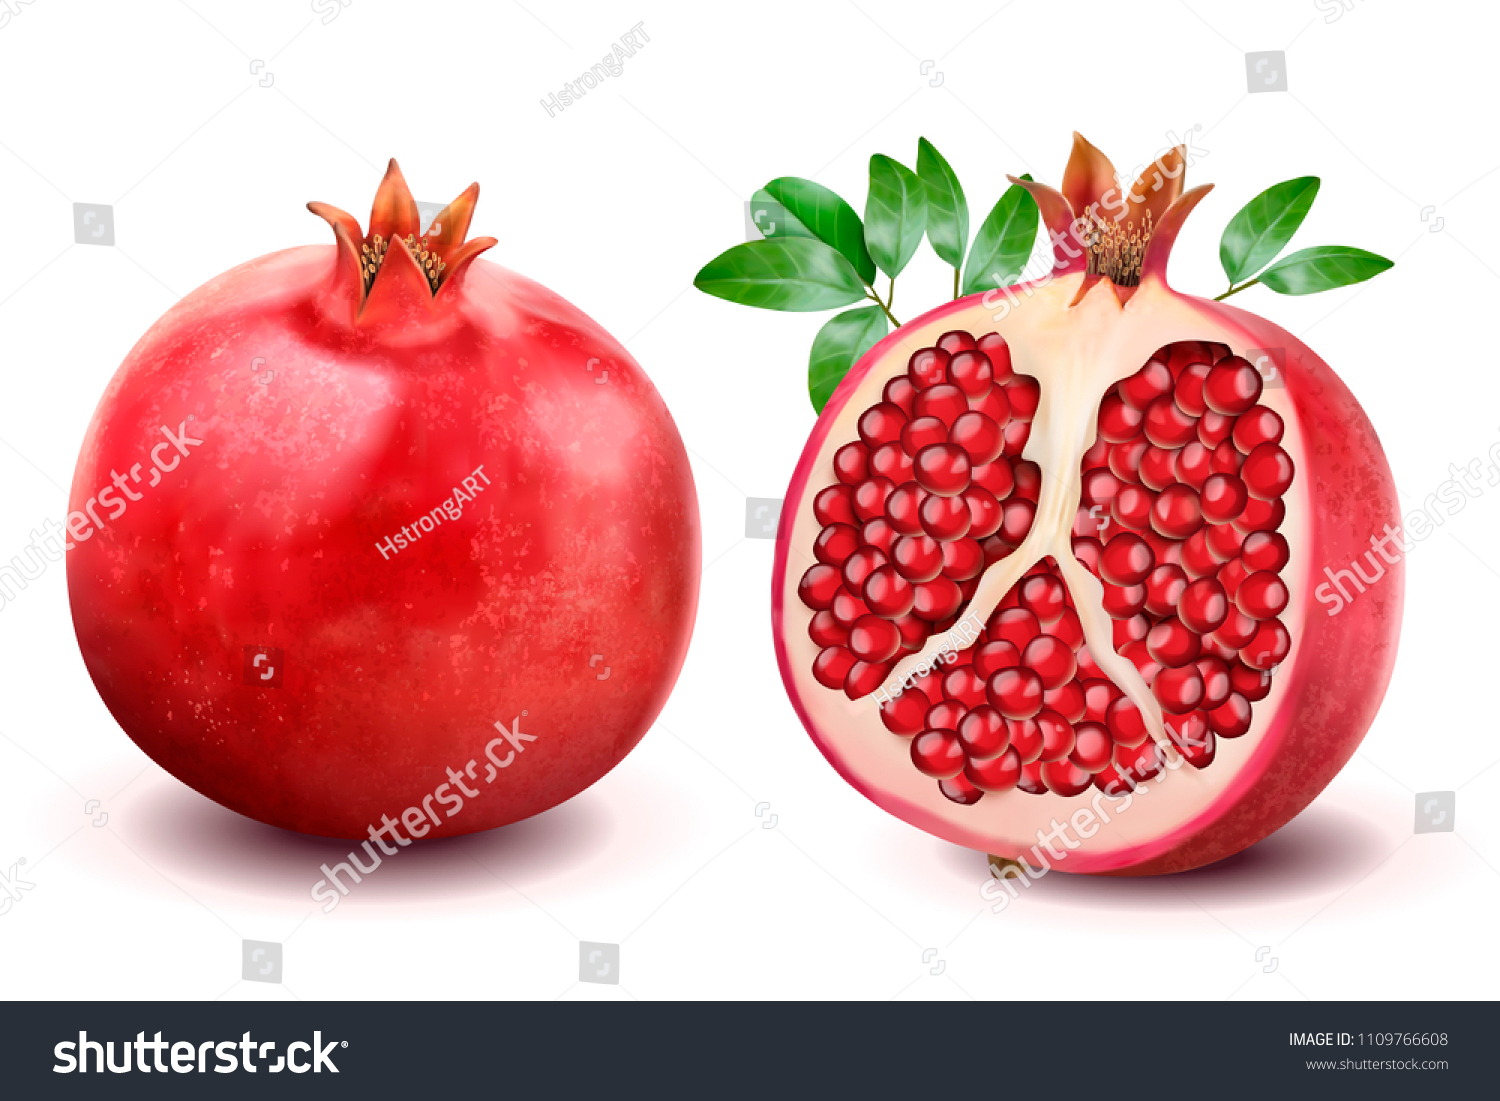 Ripe pomegranates with leaves isolated on a white background in 3d illustration #1109766608